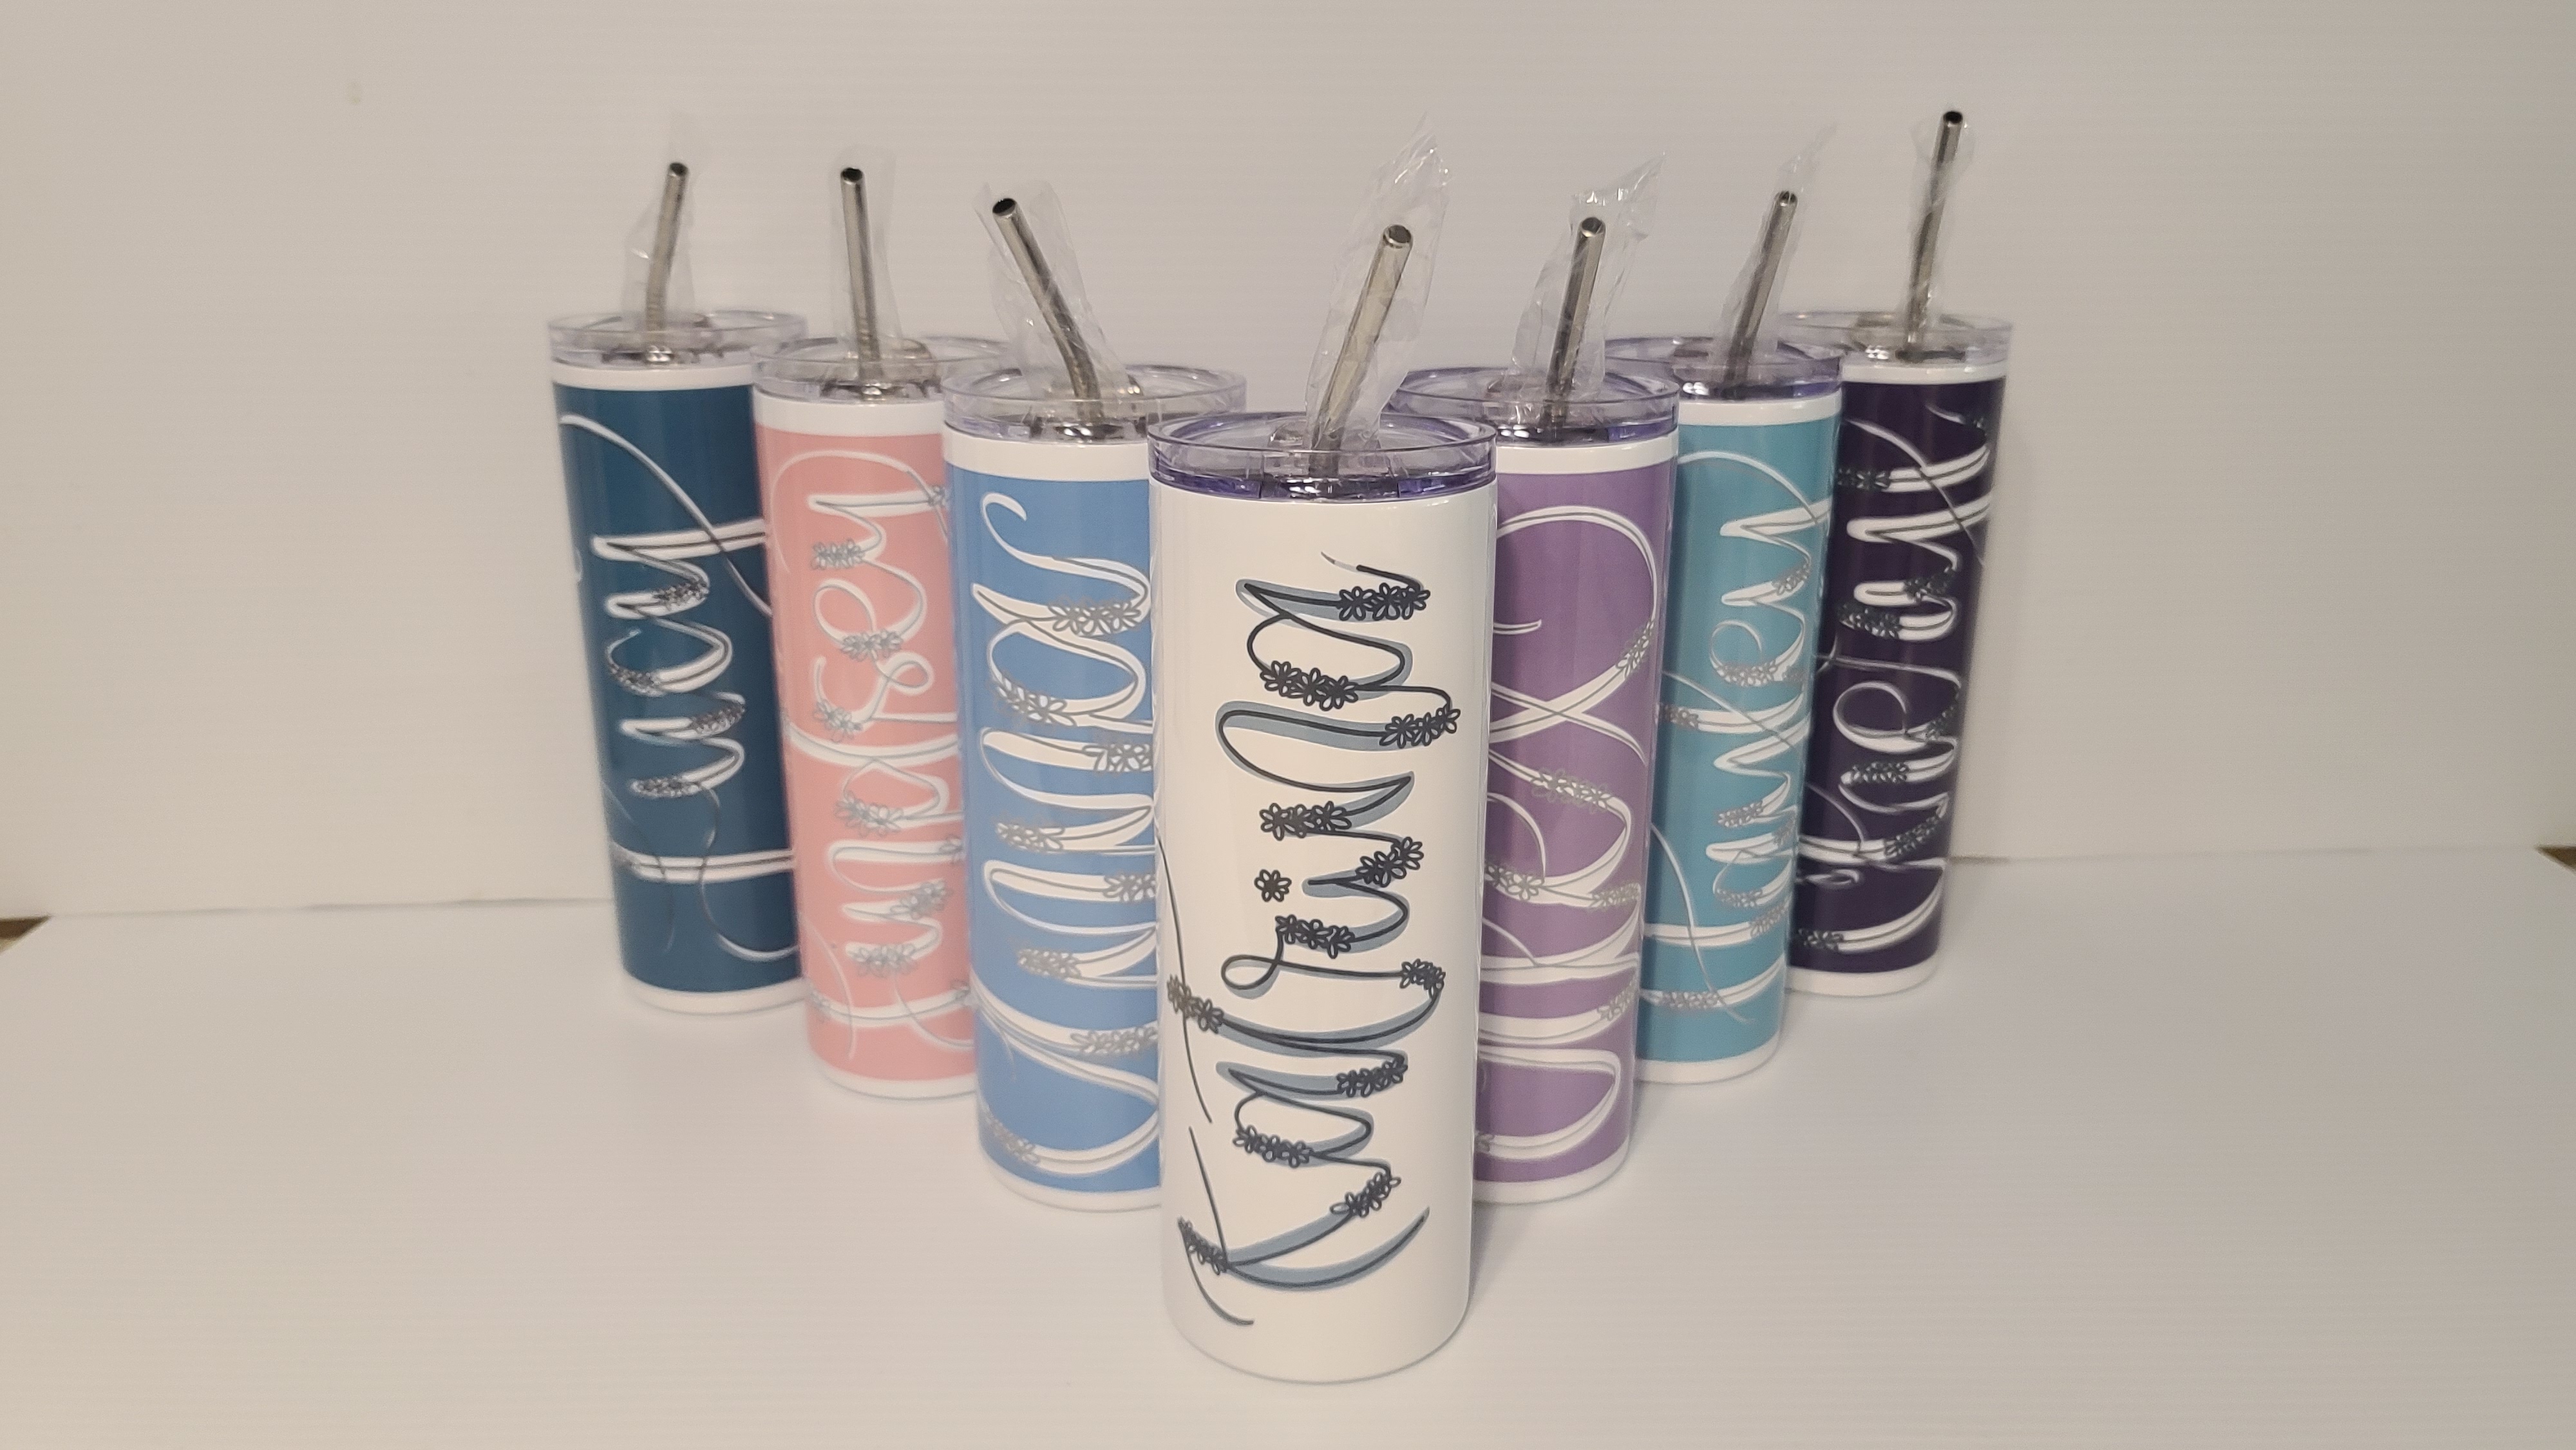 20 oz tumblers for wedding party gifts.